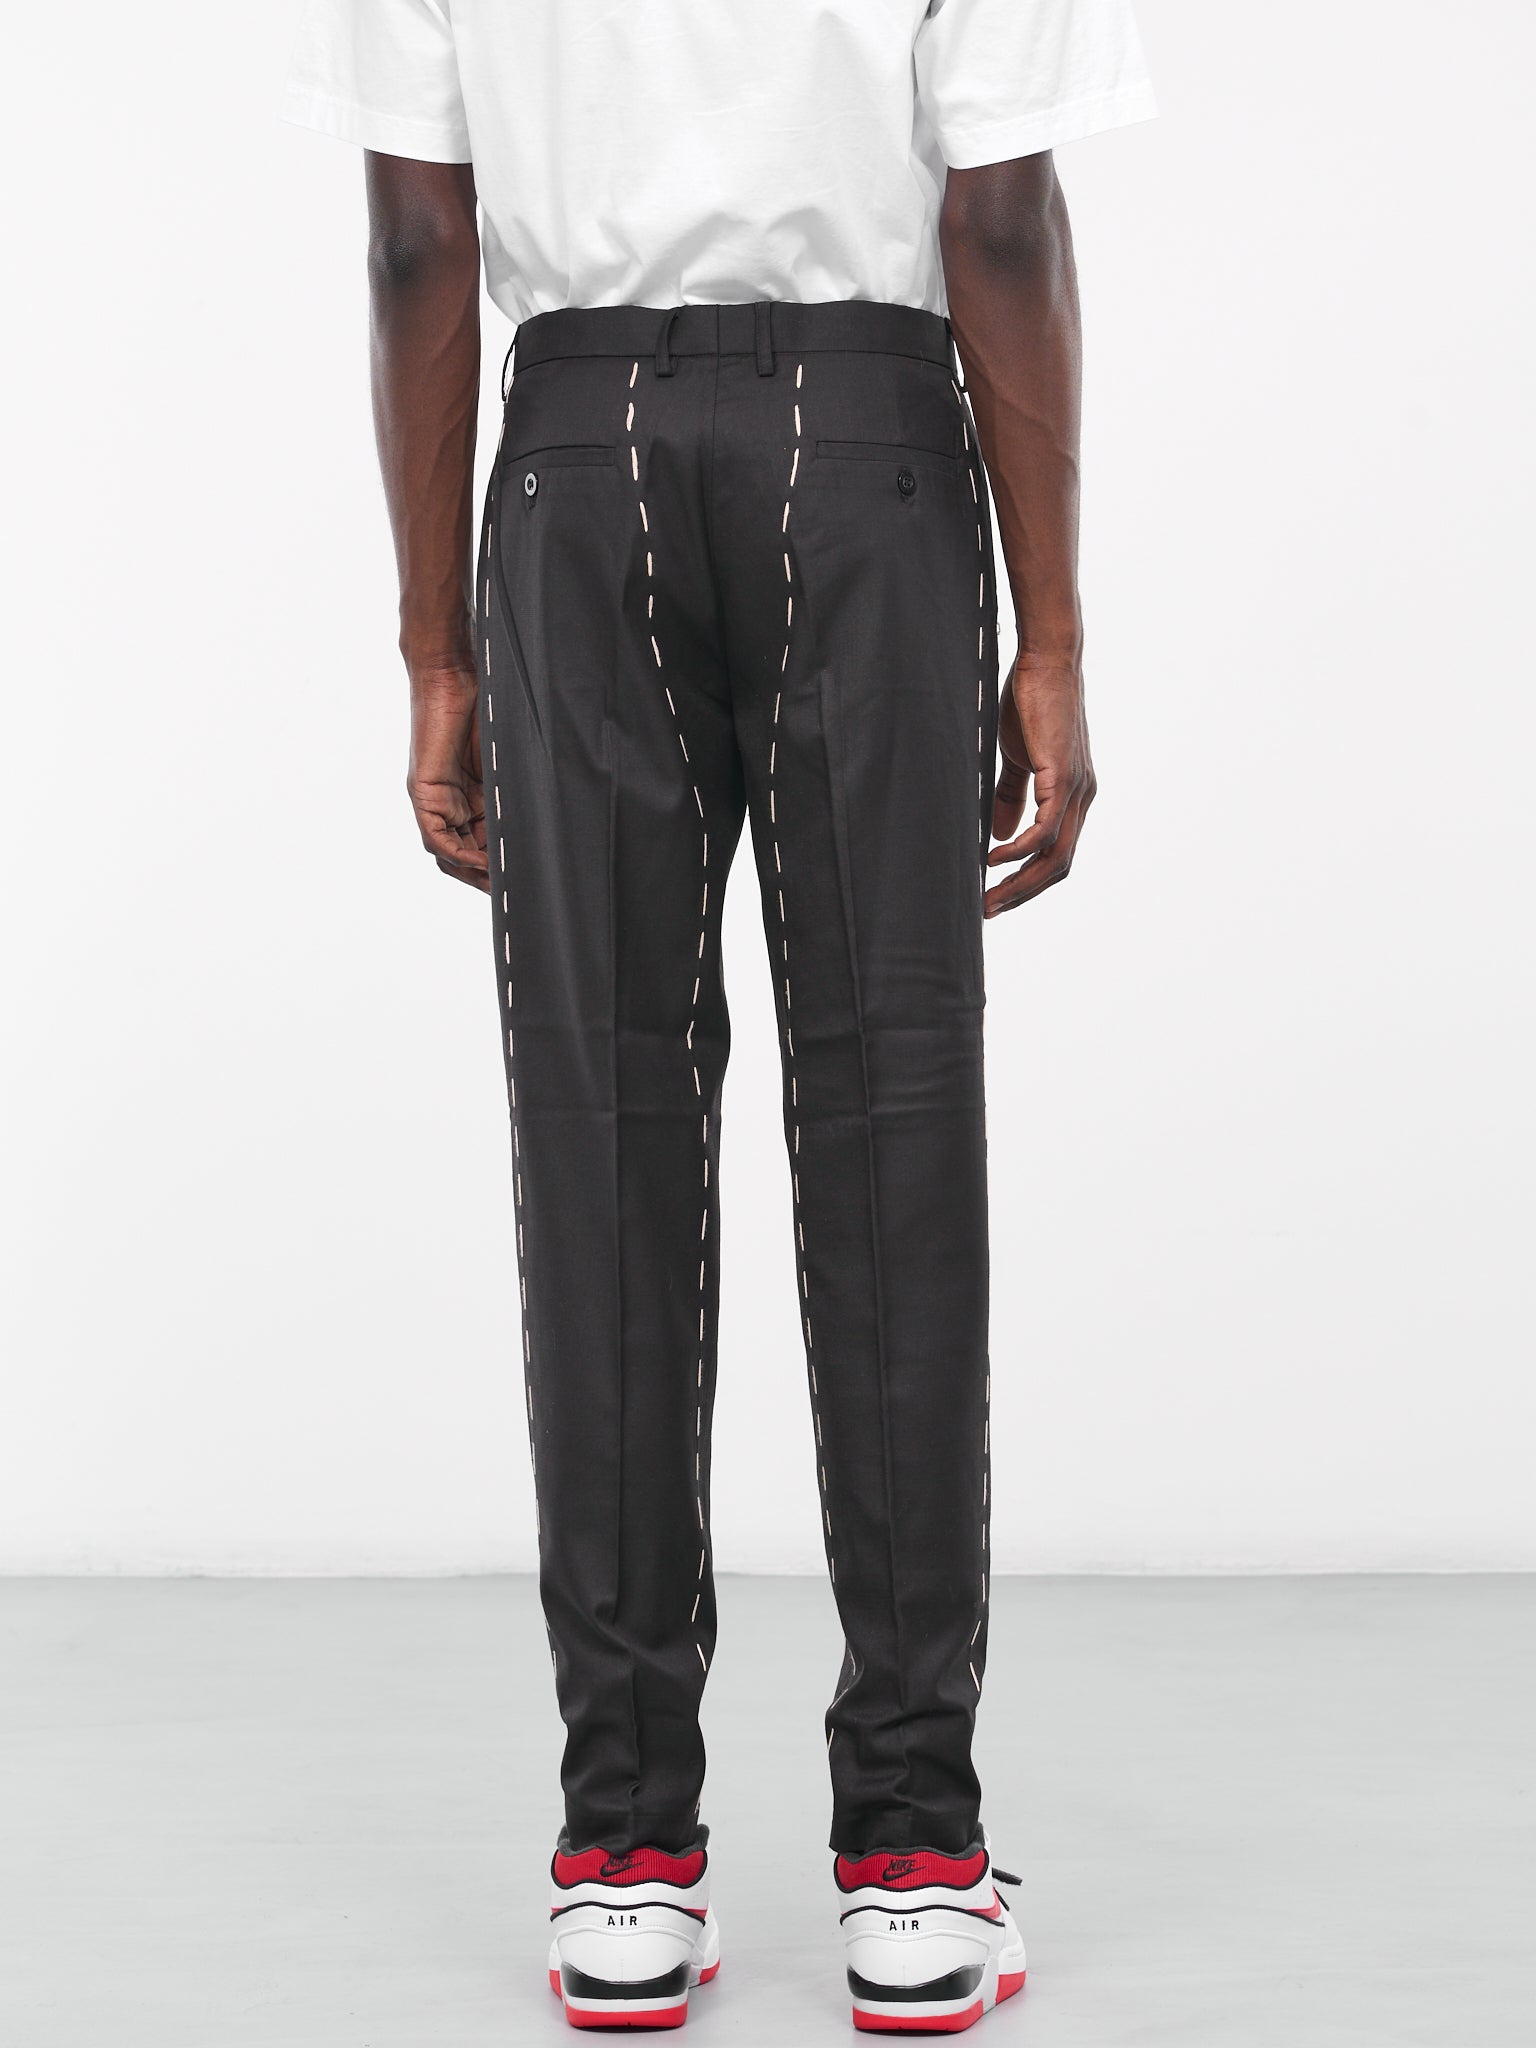 Embroidered Suit Pants (SUB-3-BLACK)